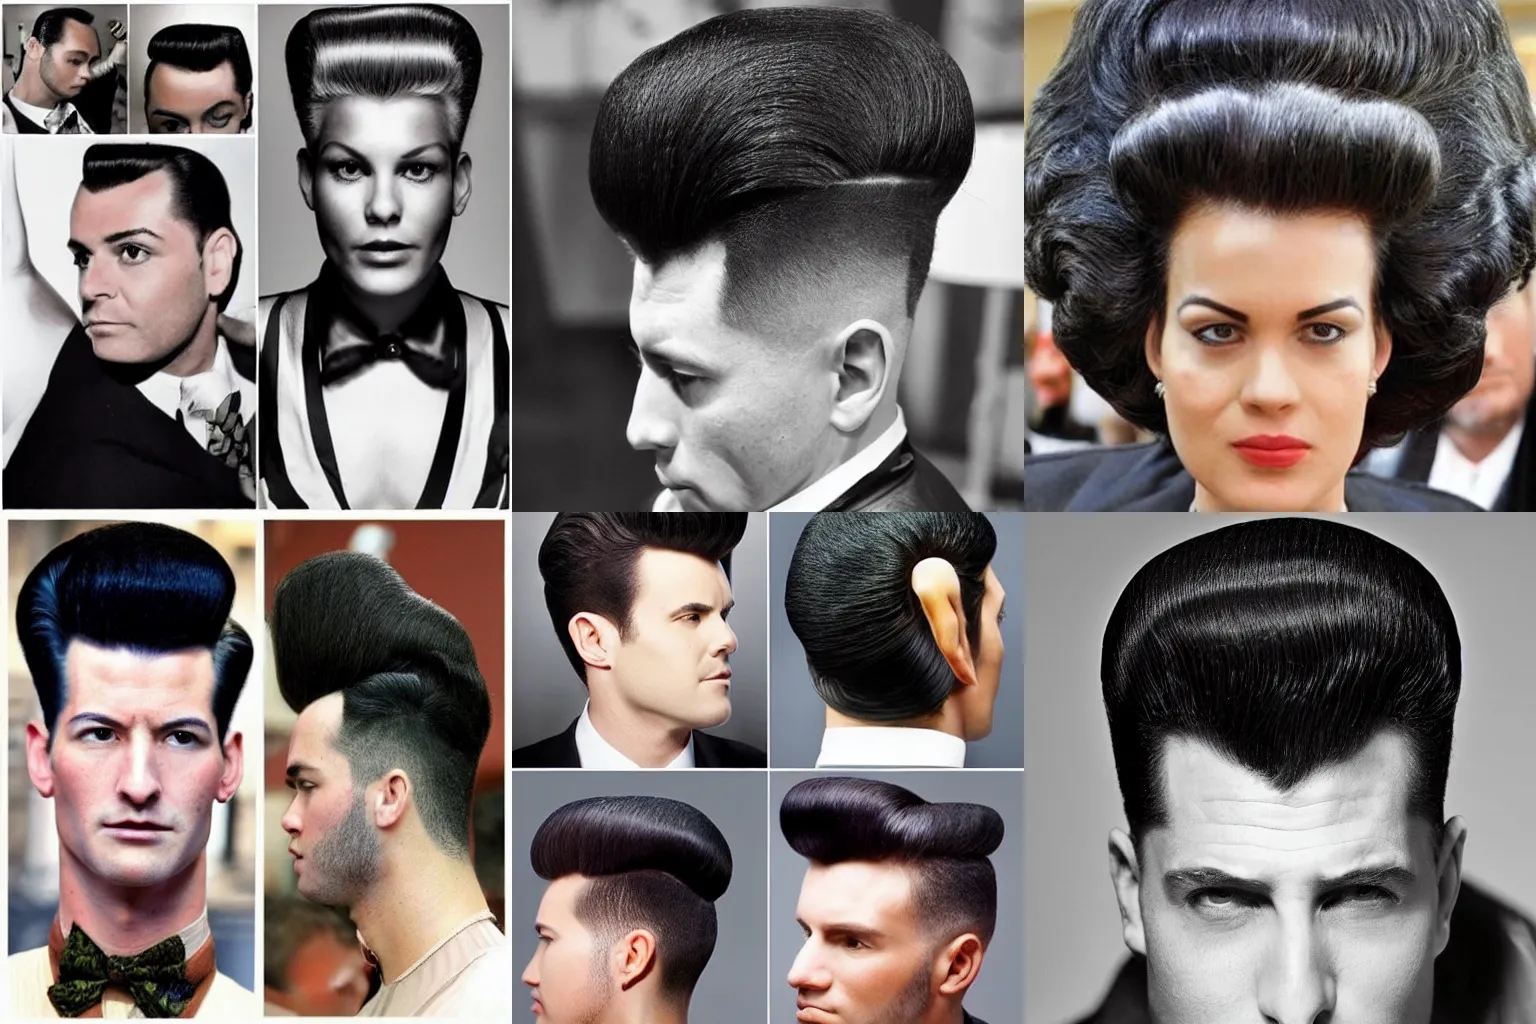 How Men's Hair Has Changed in 50 Years